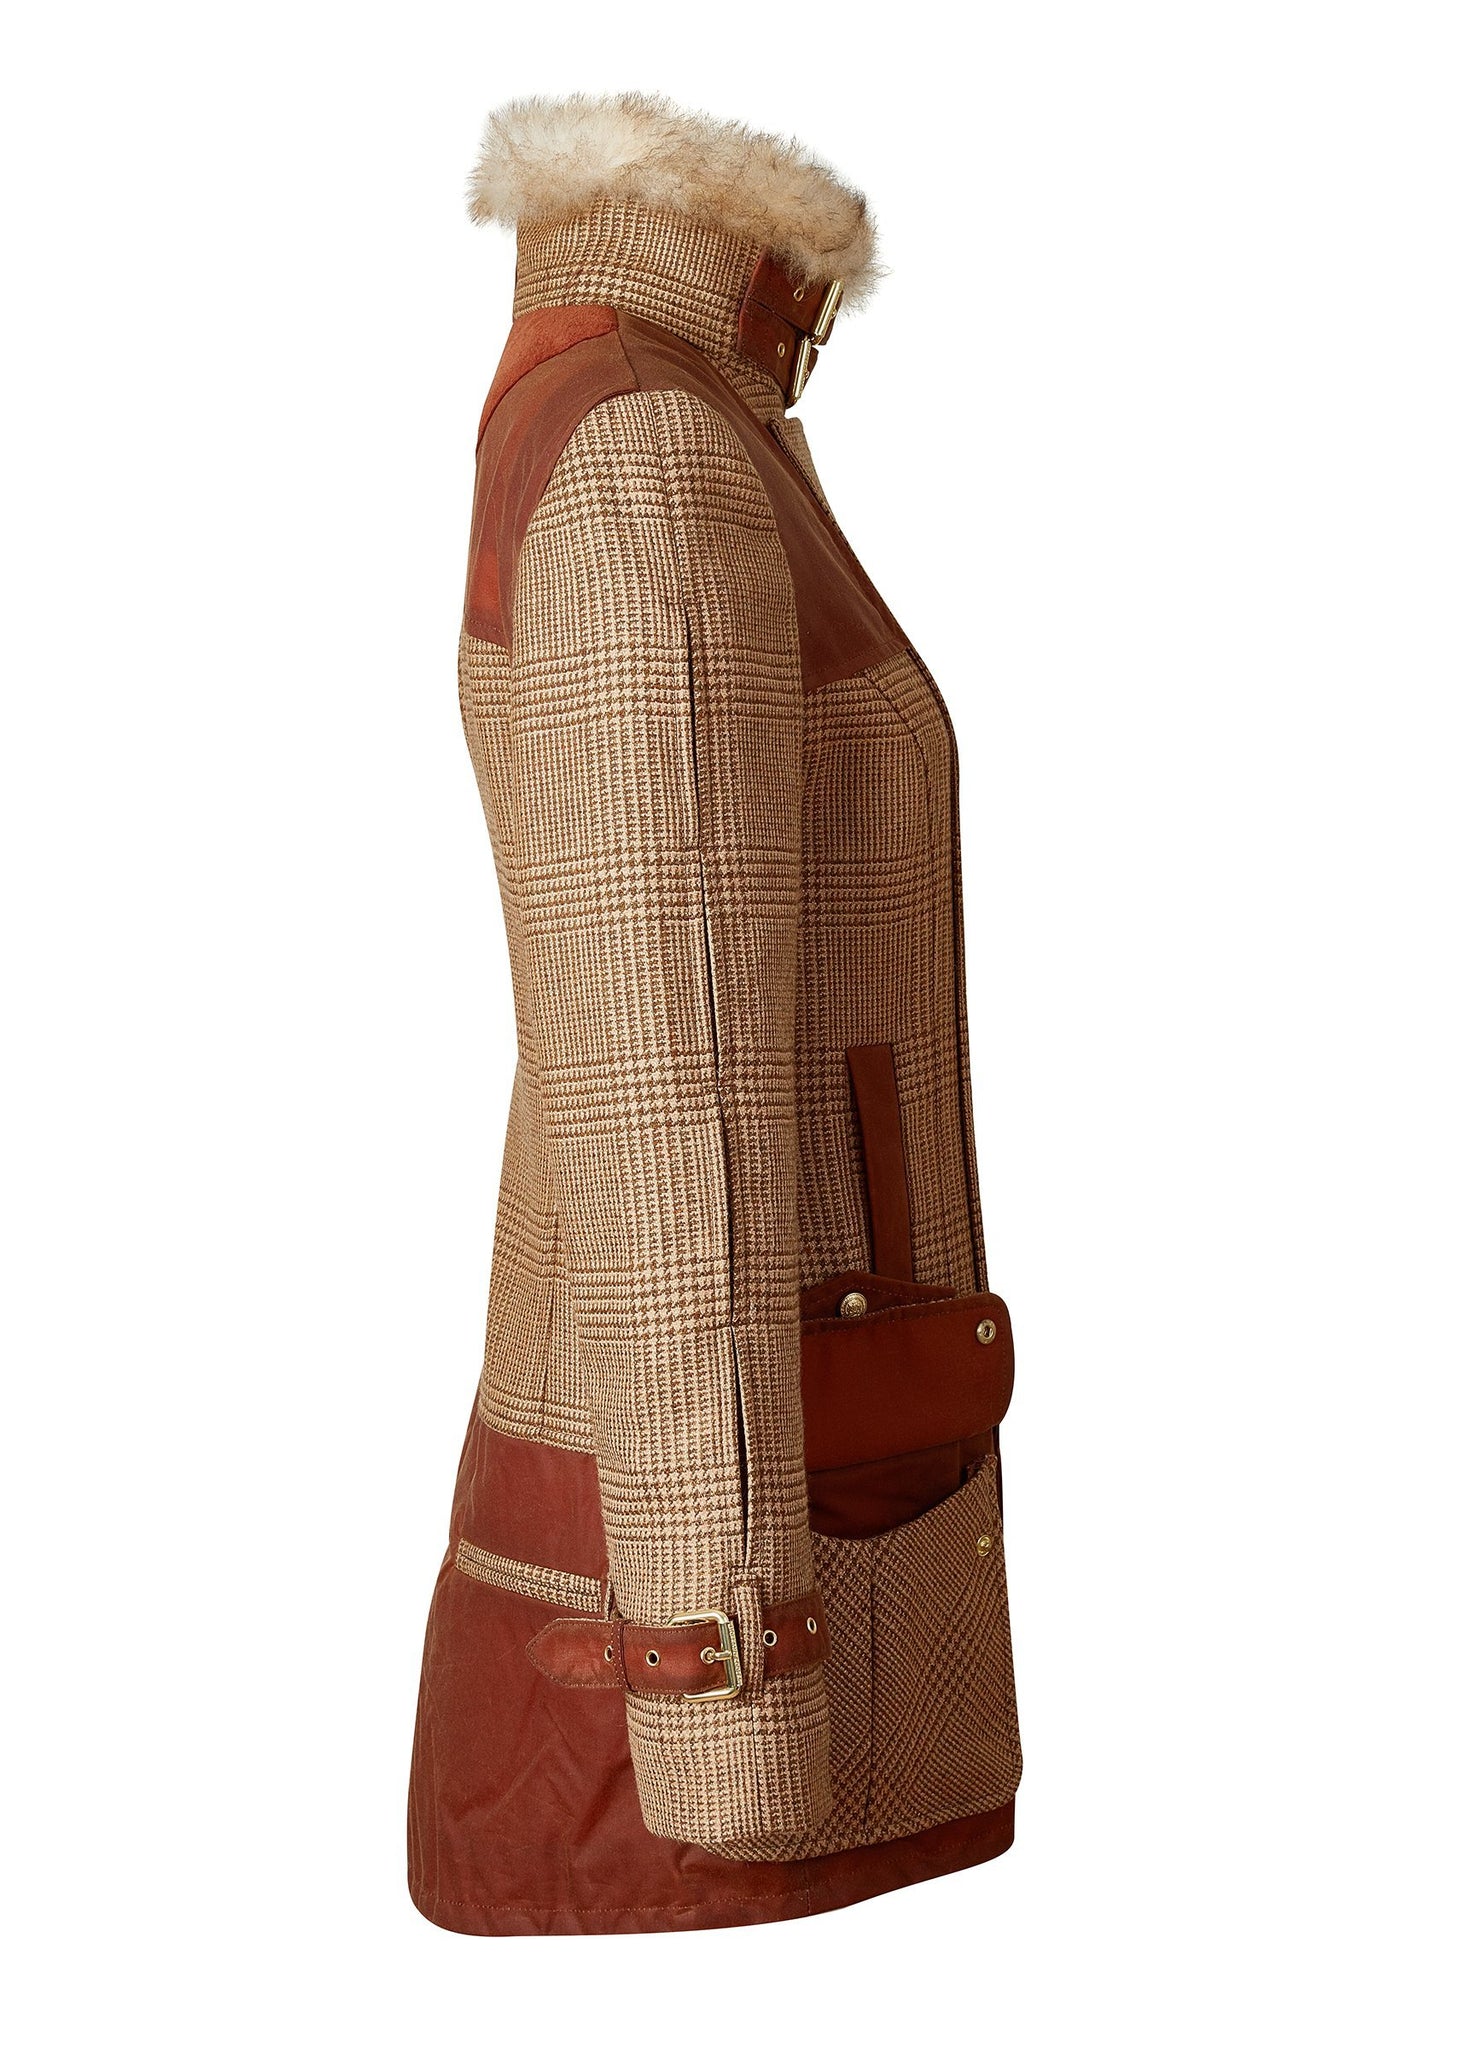 side of womens fitted field jacket in tawny and brown check tweed trimmed with contrast tan wax fabric on shoulder across back and on the hip with faux fur trim around the neck finished with horn button fastenings an buckles on the collar cuffs and hip